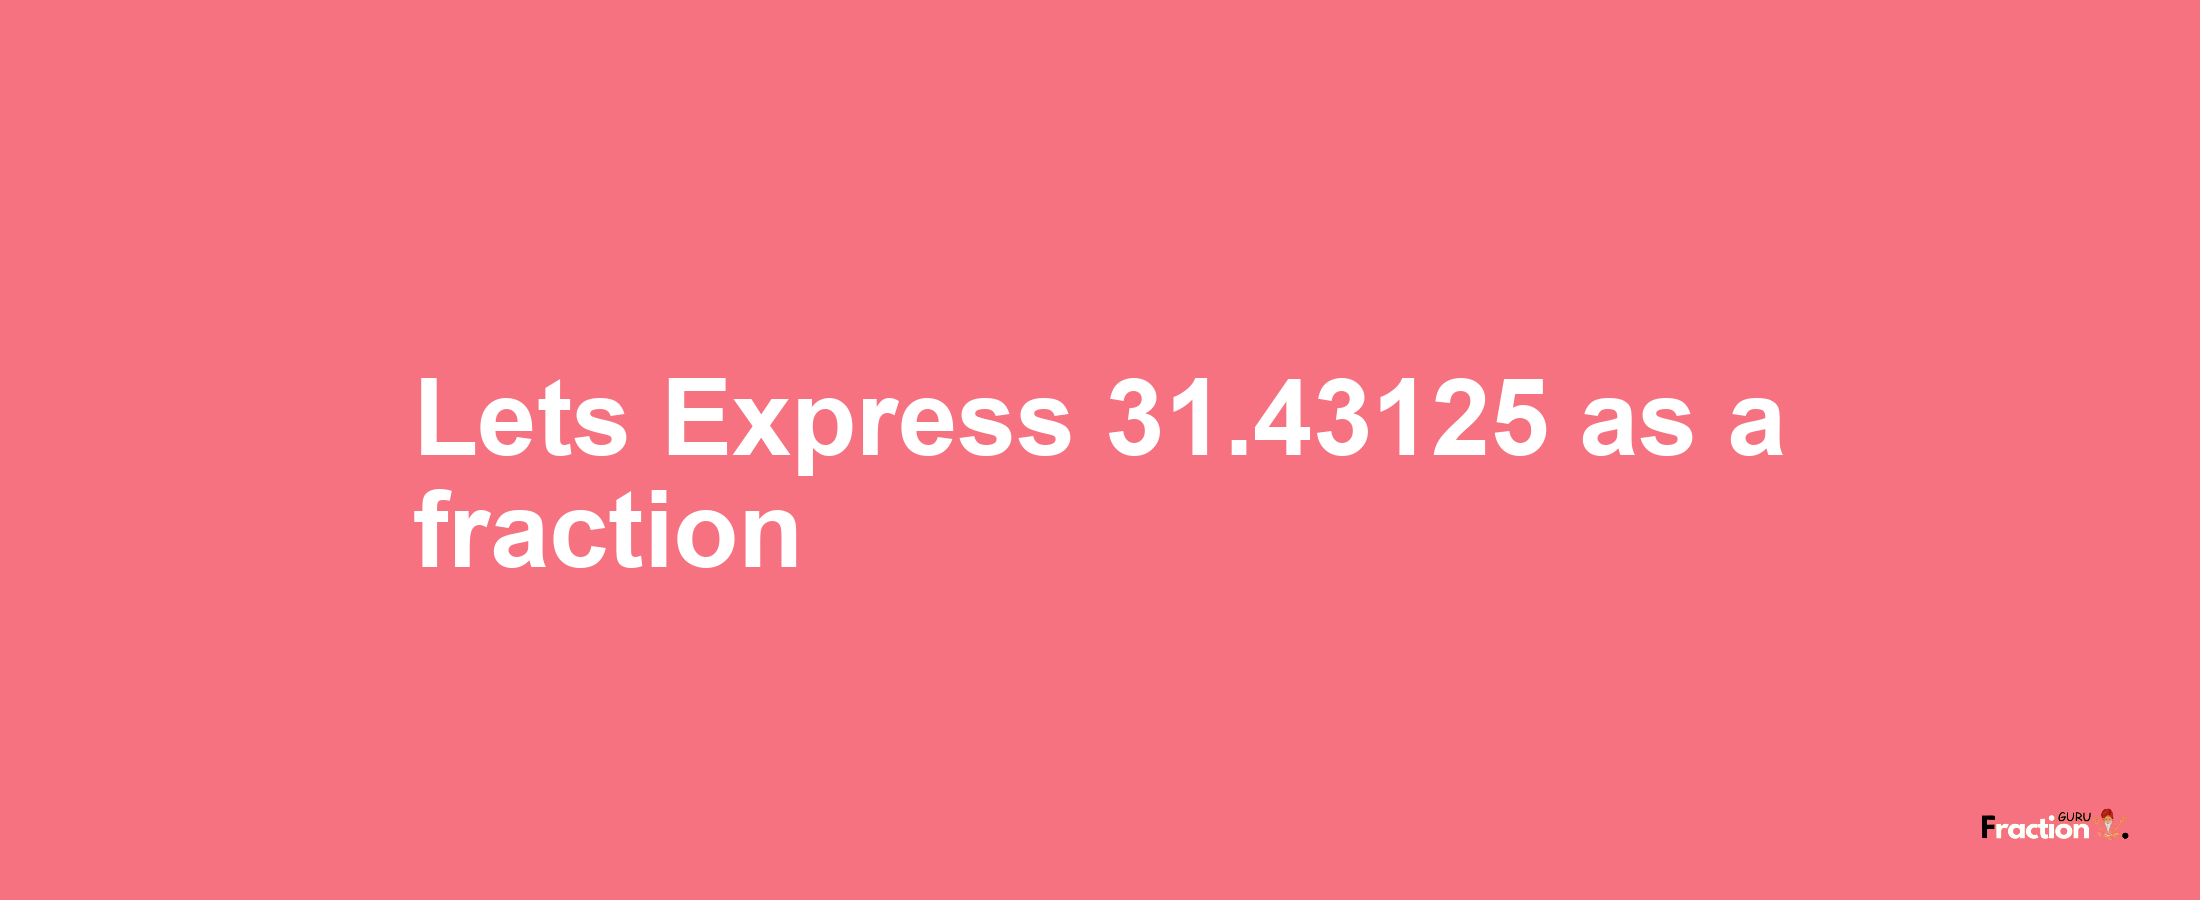 Lets Express 31.43125 as afraction